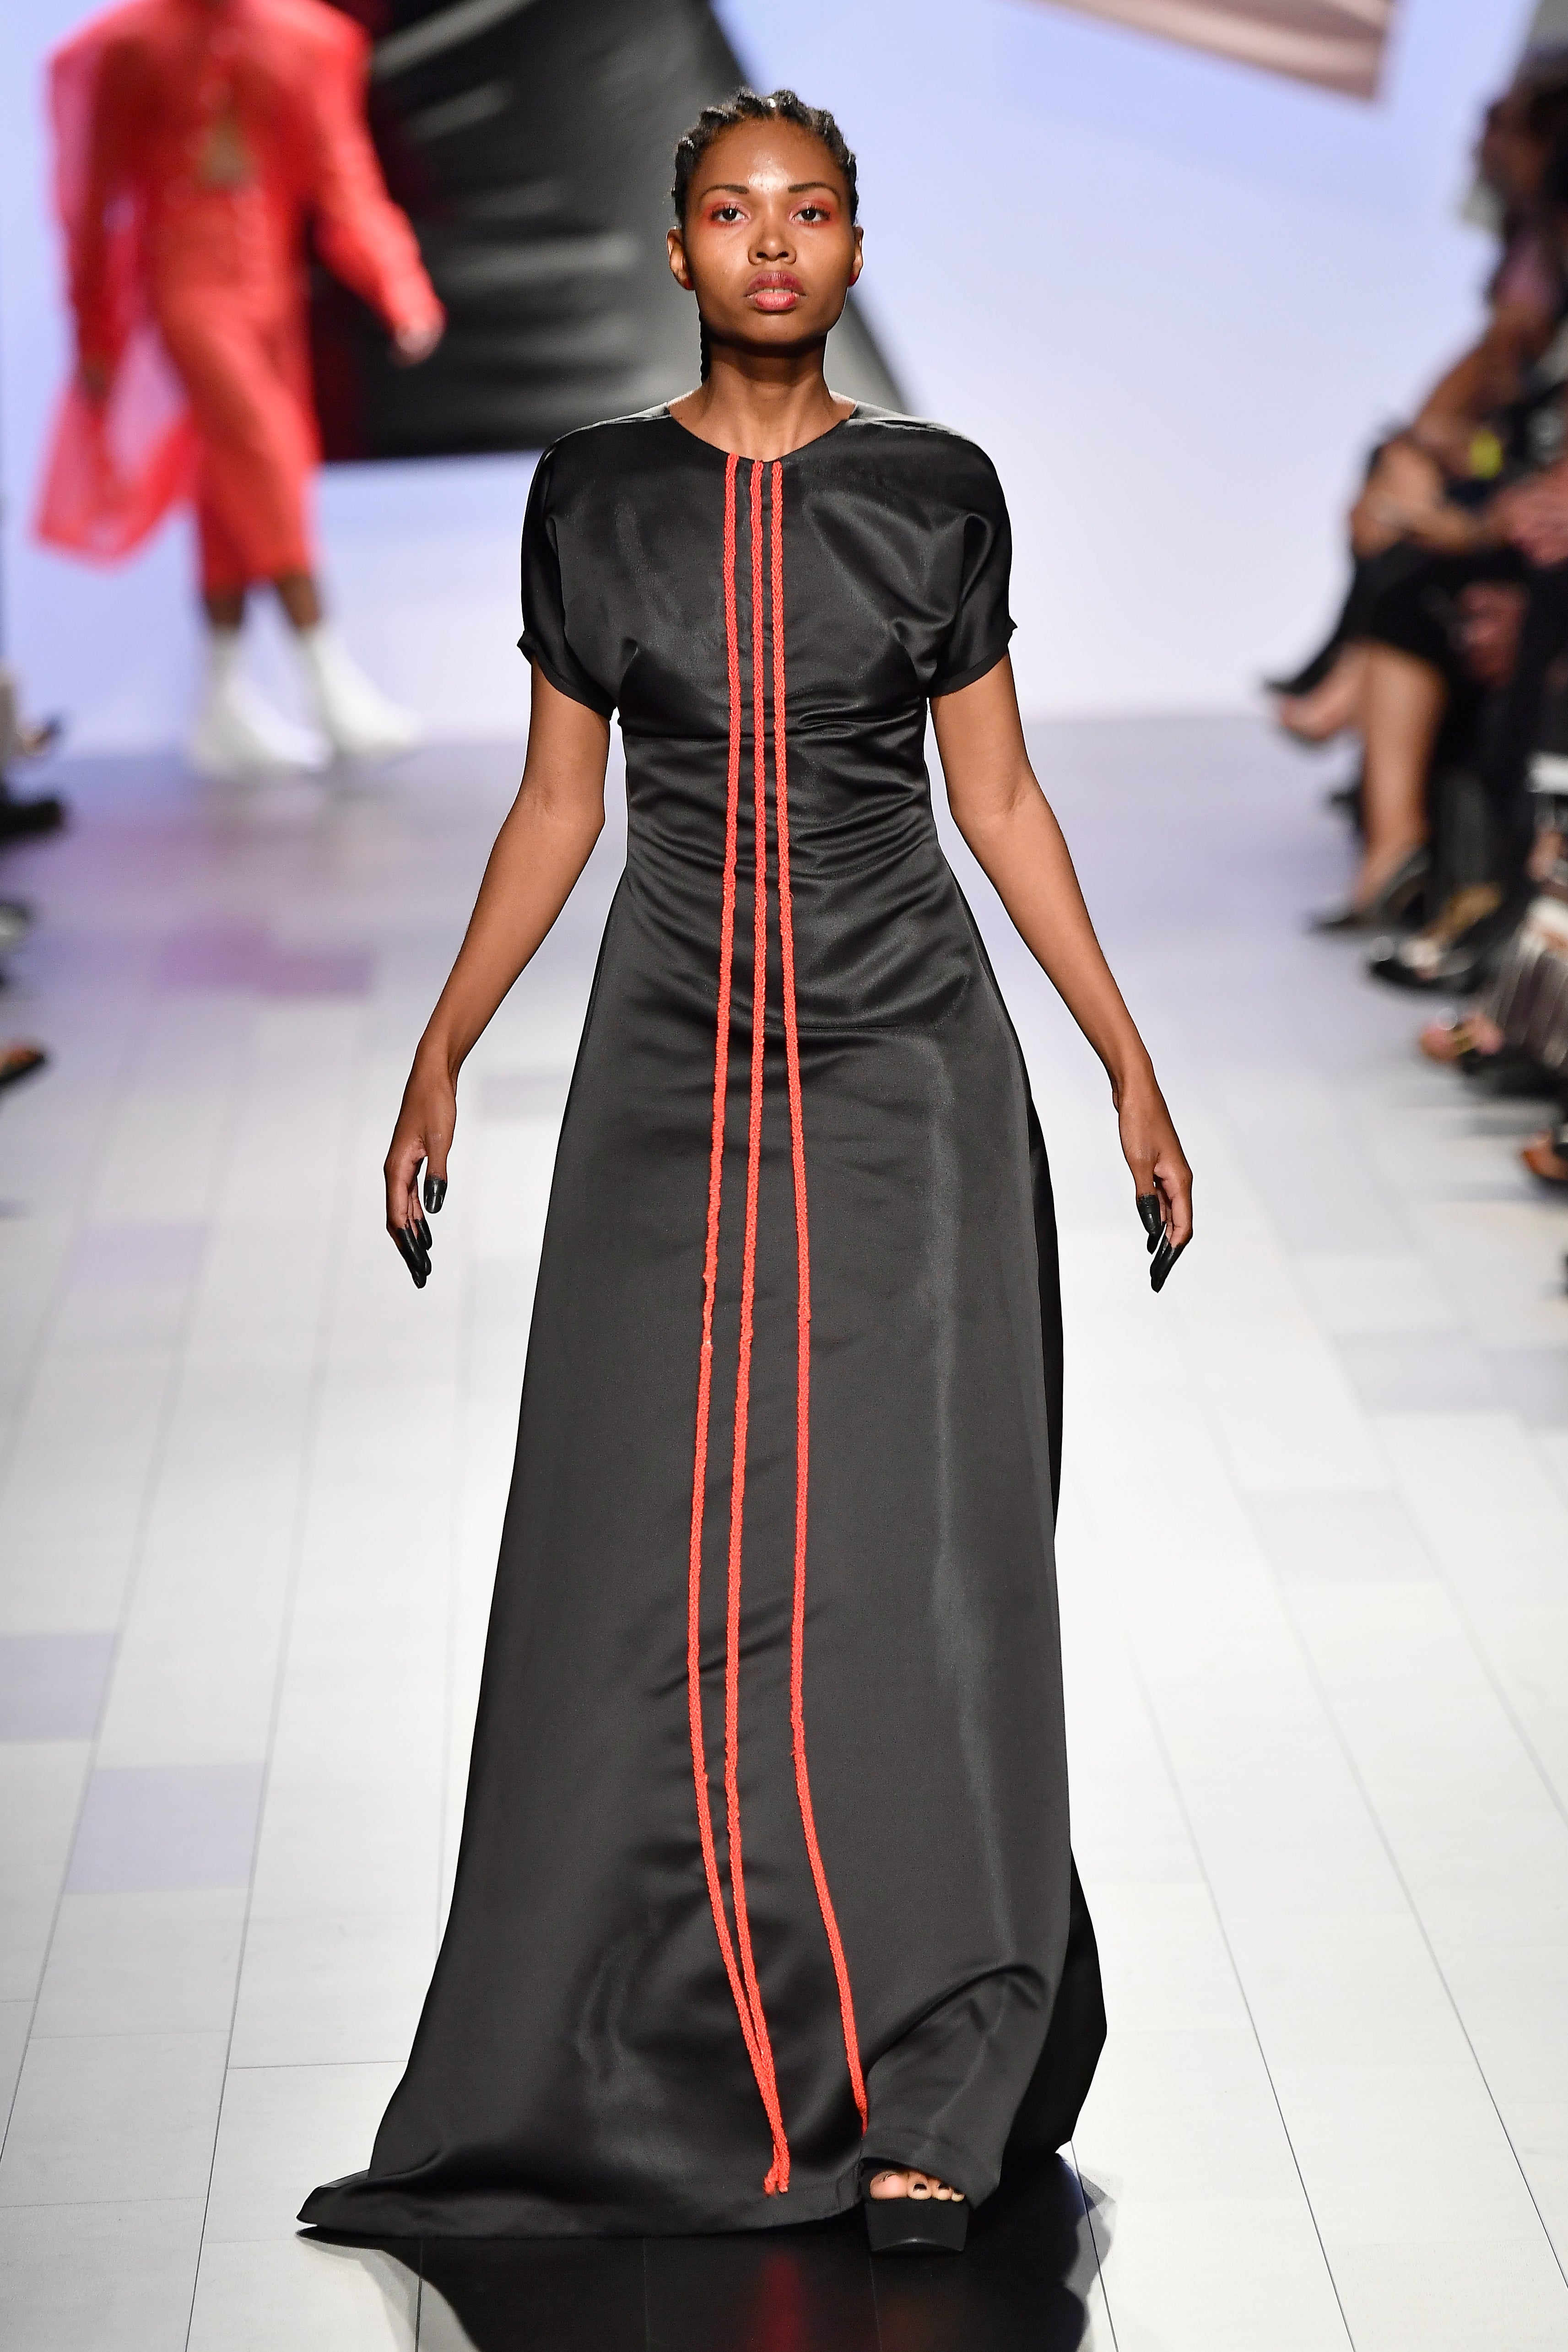 Behold All The Black Models Slaying The New York Fashion Week Runway
